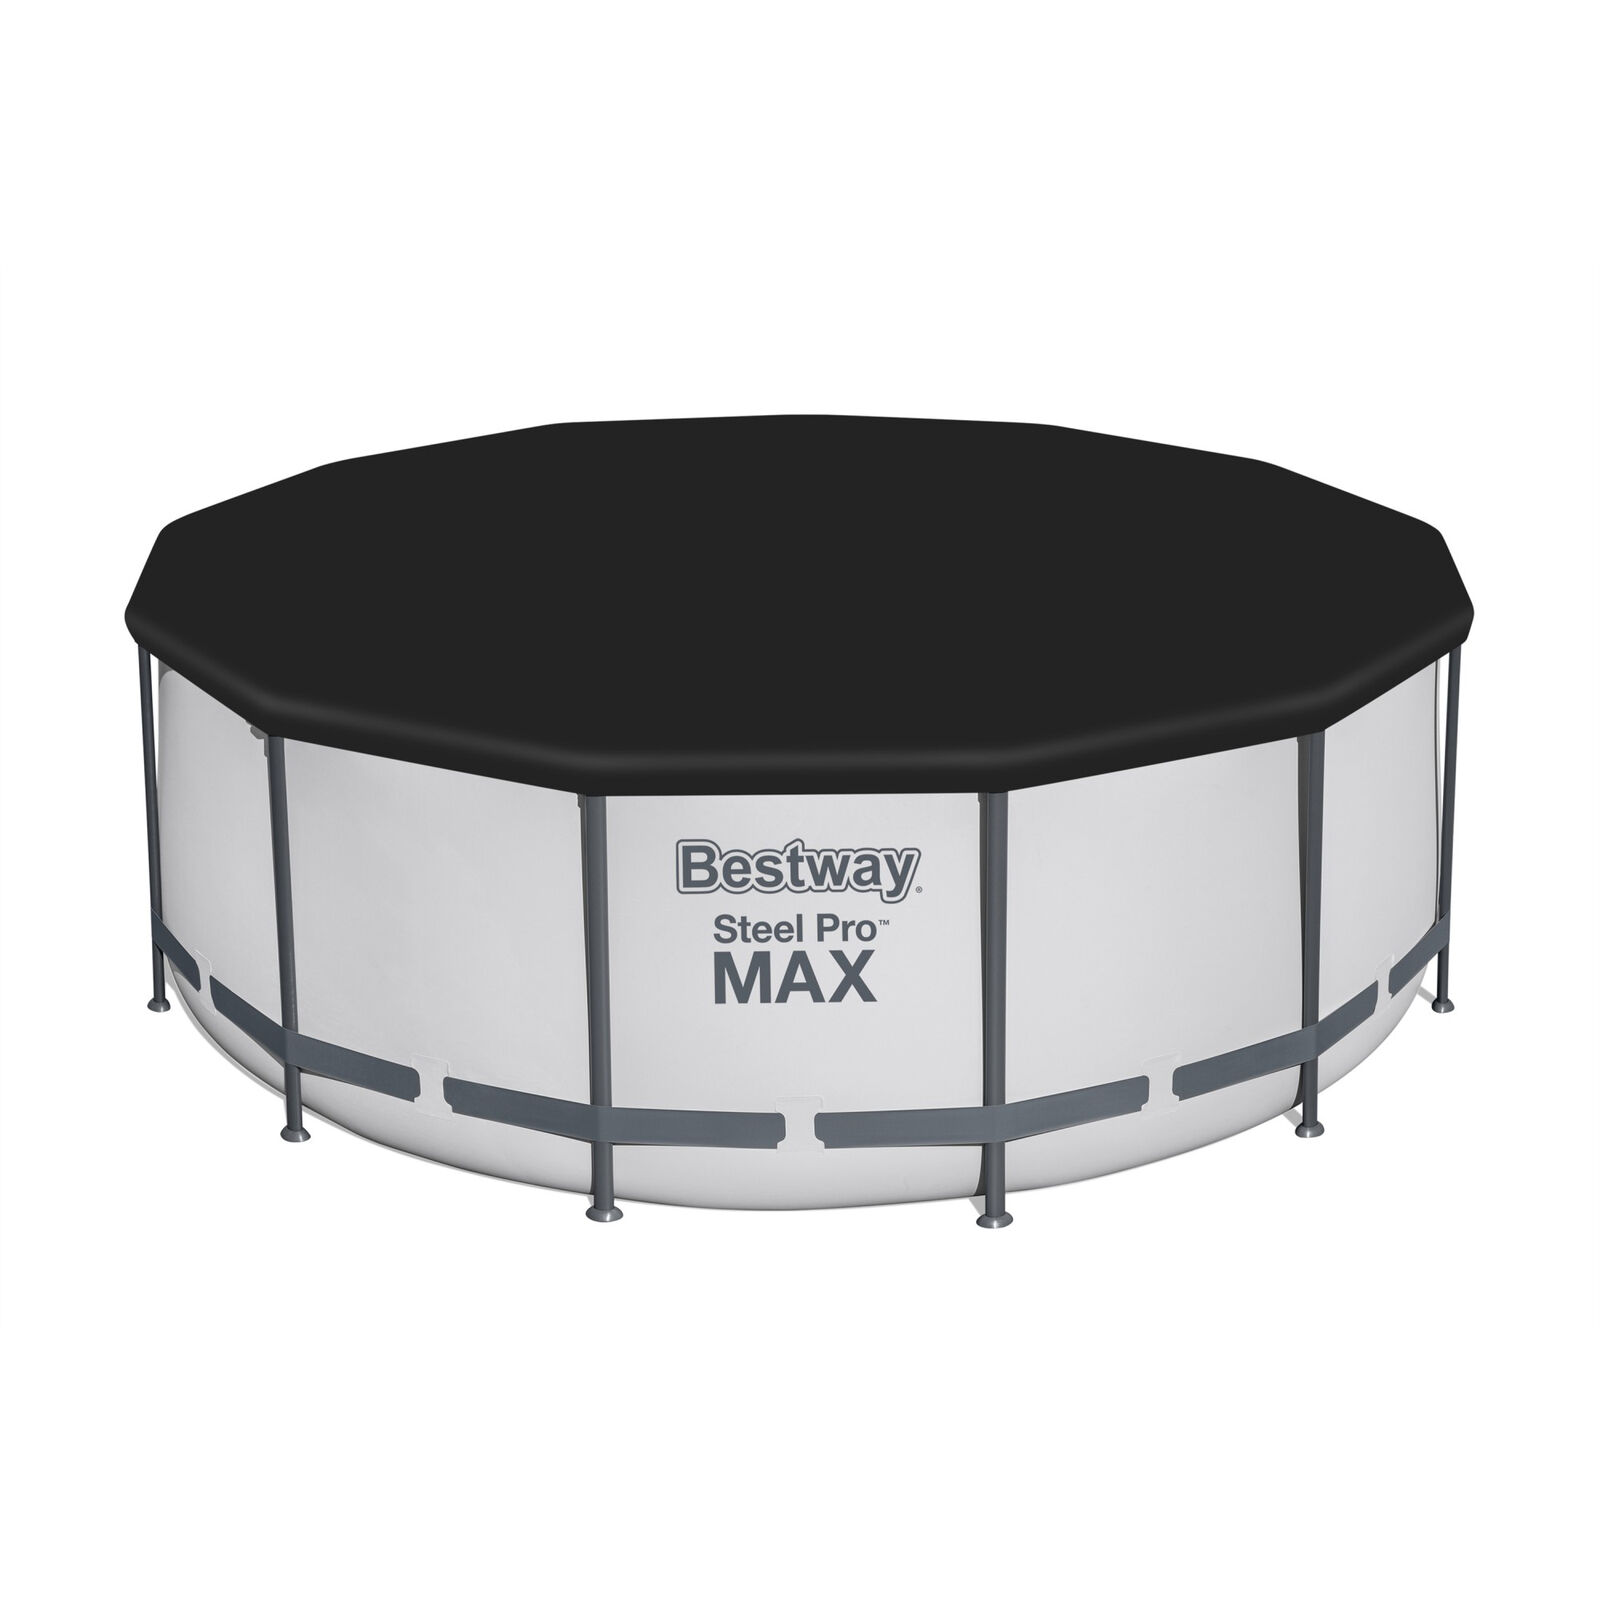 Bestway Steel Pro MAX 13'x48" Round Above Ground Swimming Pool with Pump & Cover